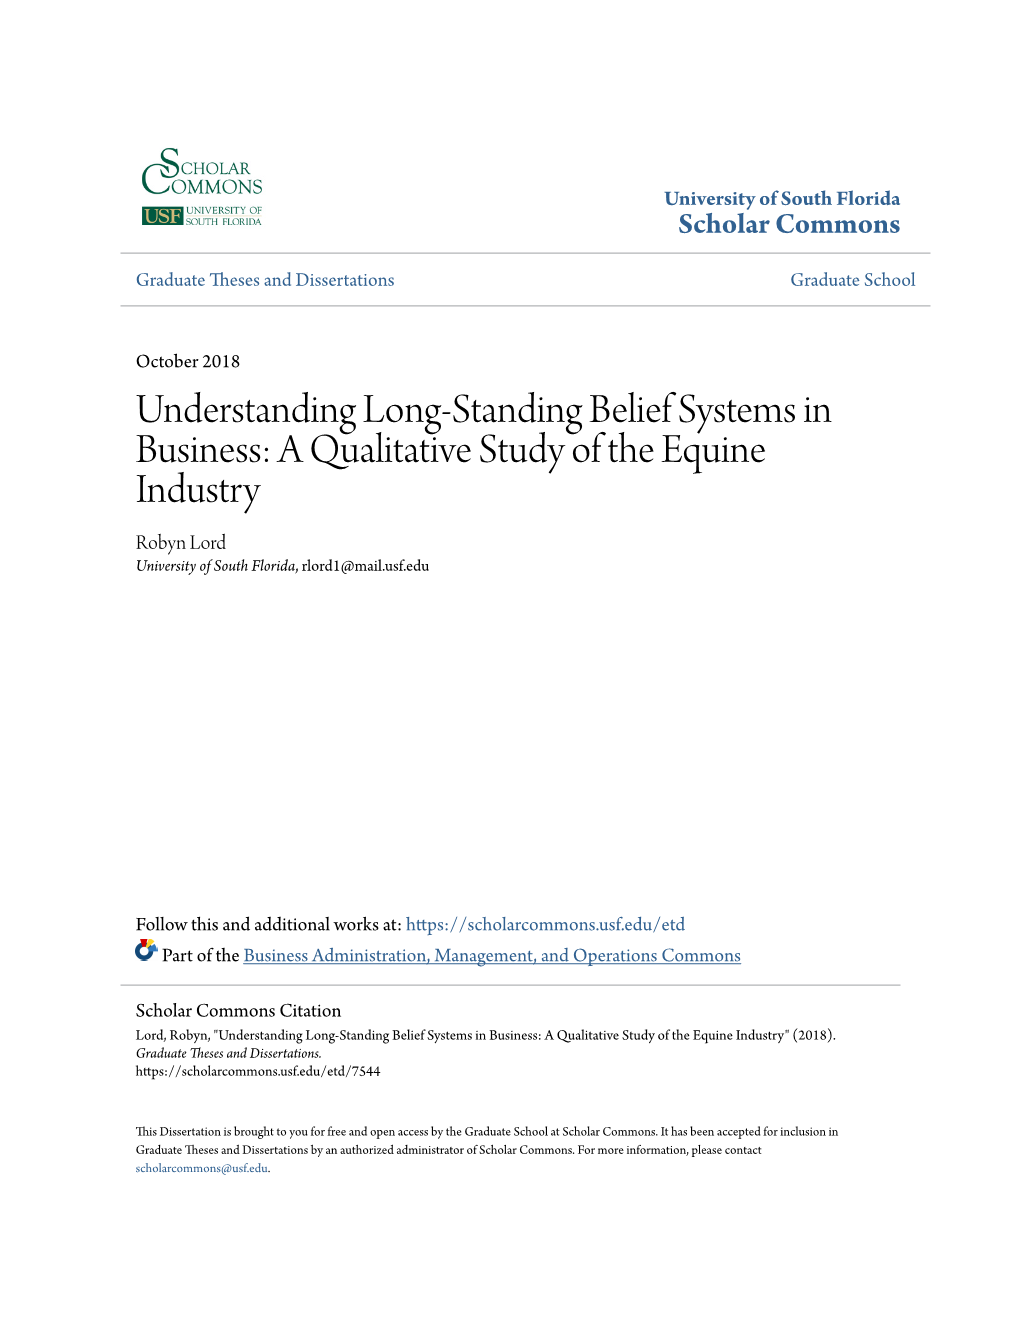 Understanding Long-Standing Belief Systems in Business: a Qualitative Study of the Equine Industry Robyn Lord University of South Florida, Rlord1@Mail.Usf.Edu